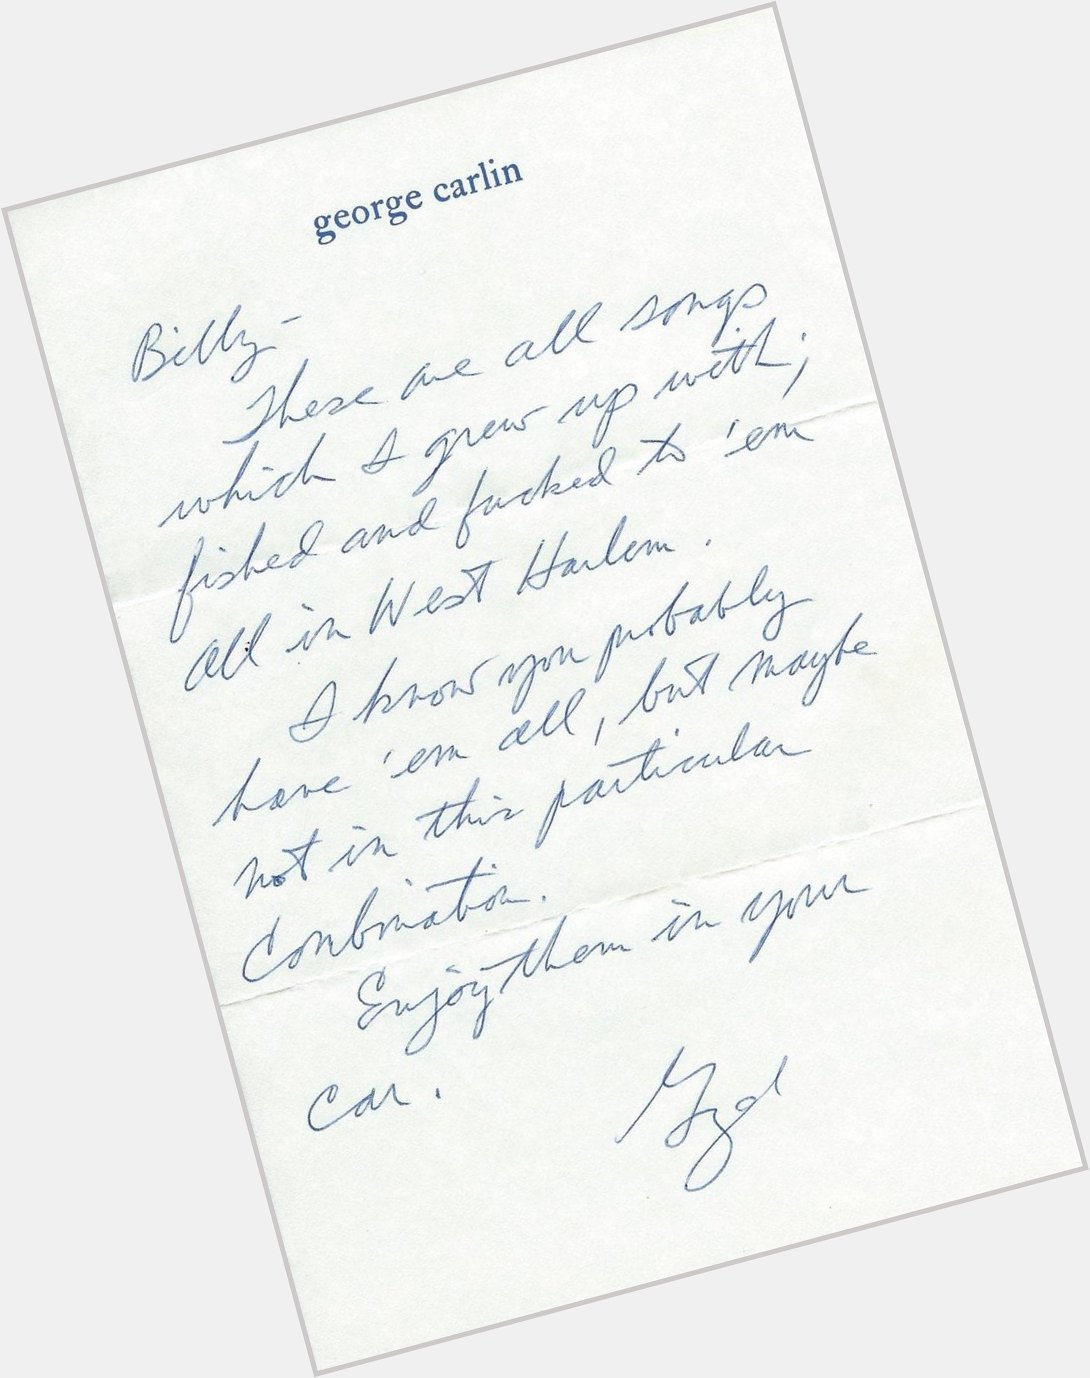 Happy Birthday George Carlin!
Here\s the note that accompanied a cassette he sent me once.
b. May 12, 1937 